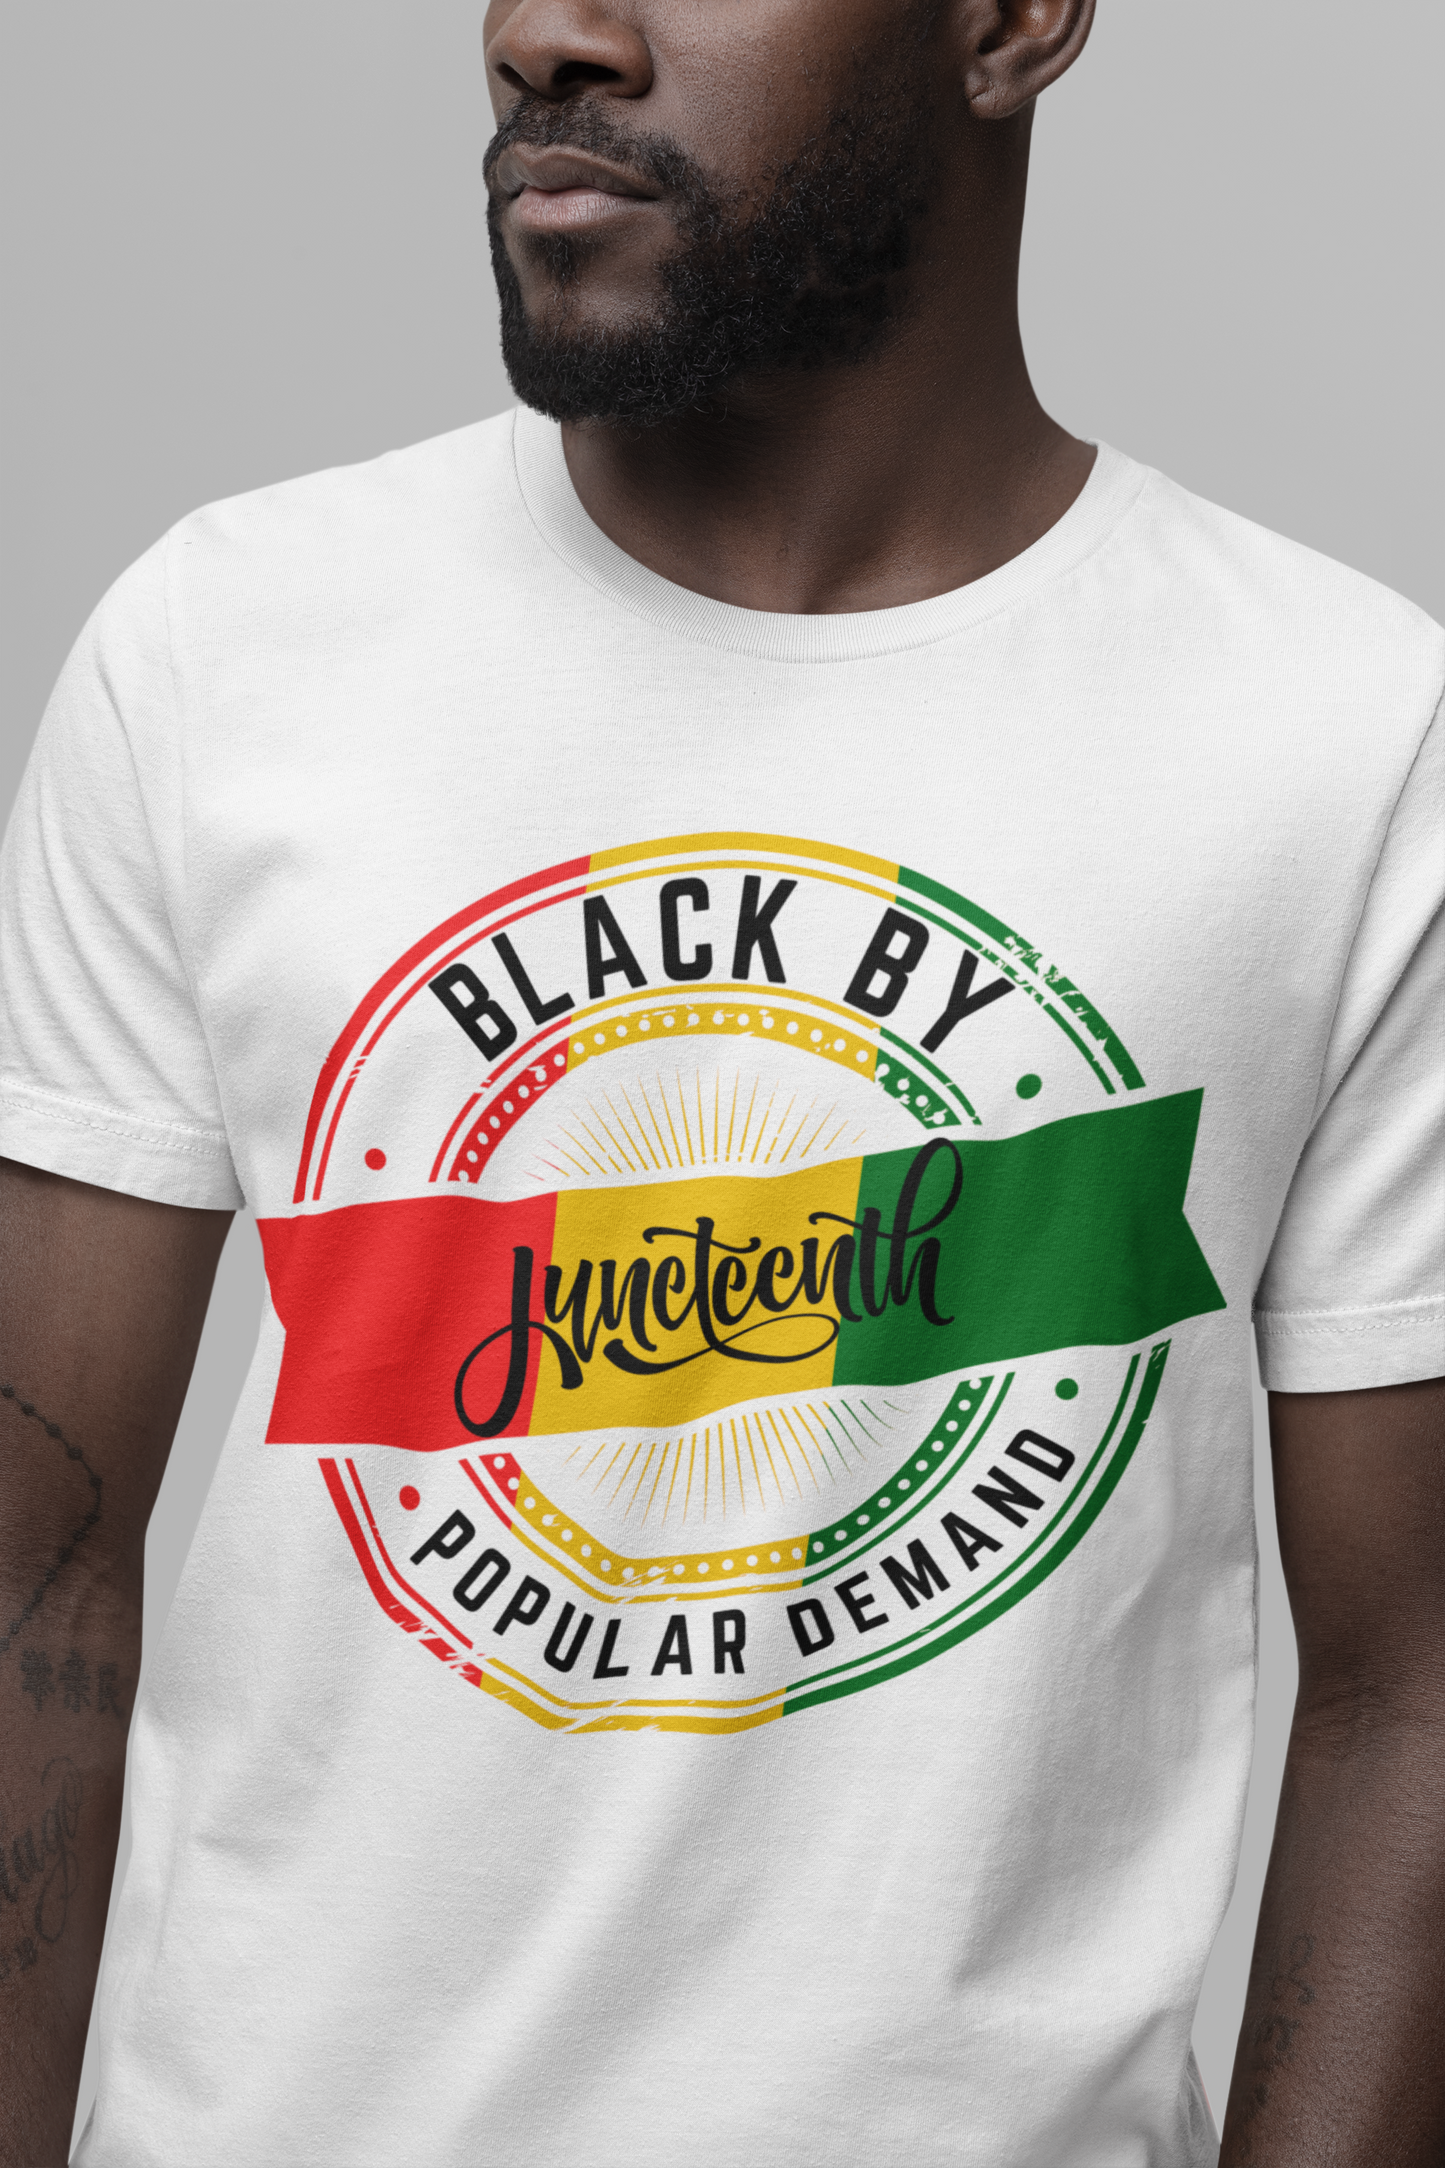 "JUNETEENTH - Black by Demand" - Limited Edition